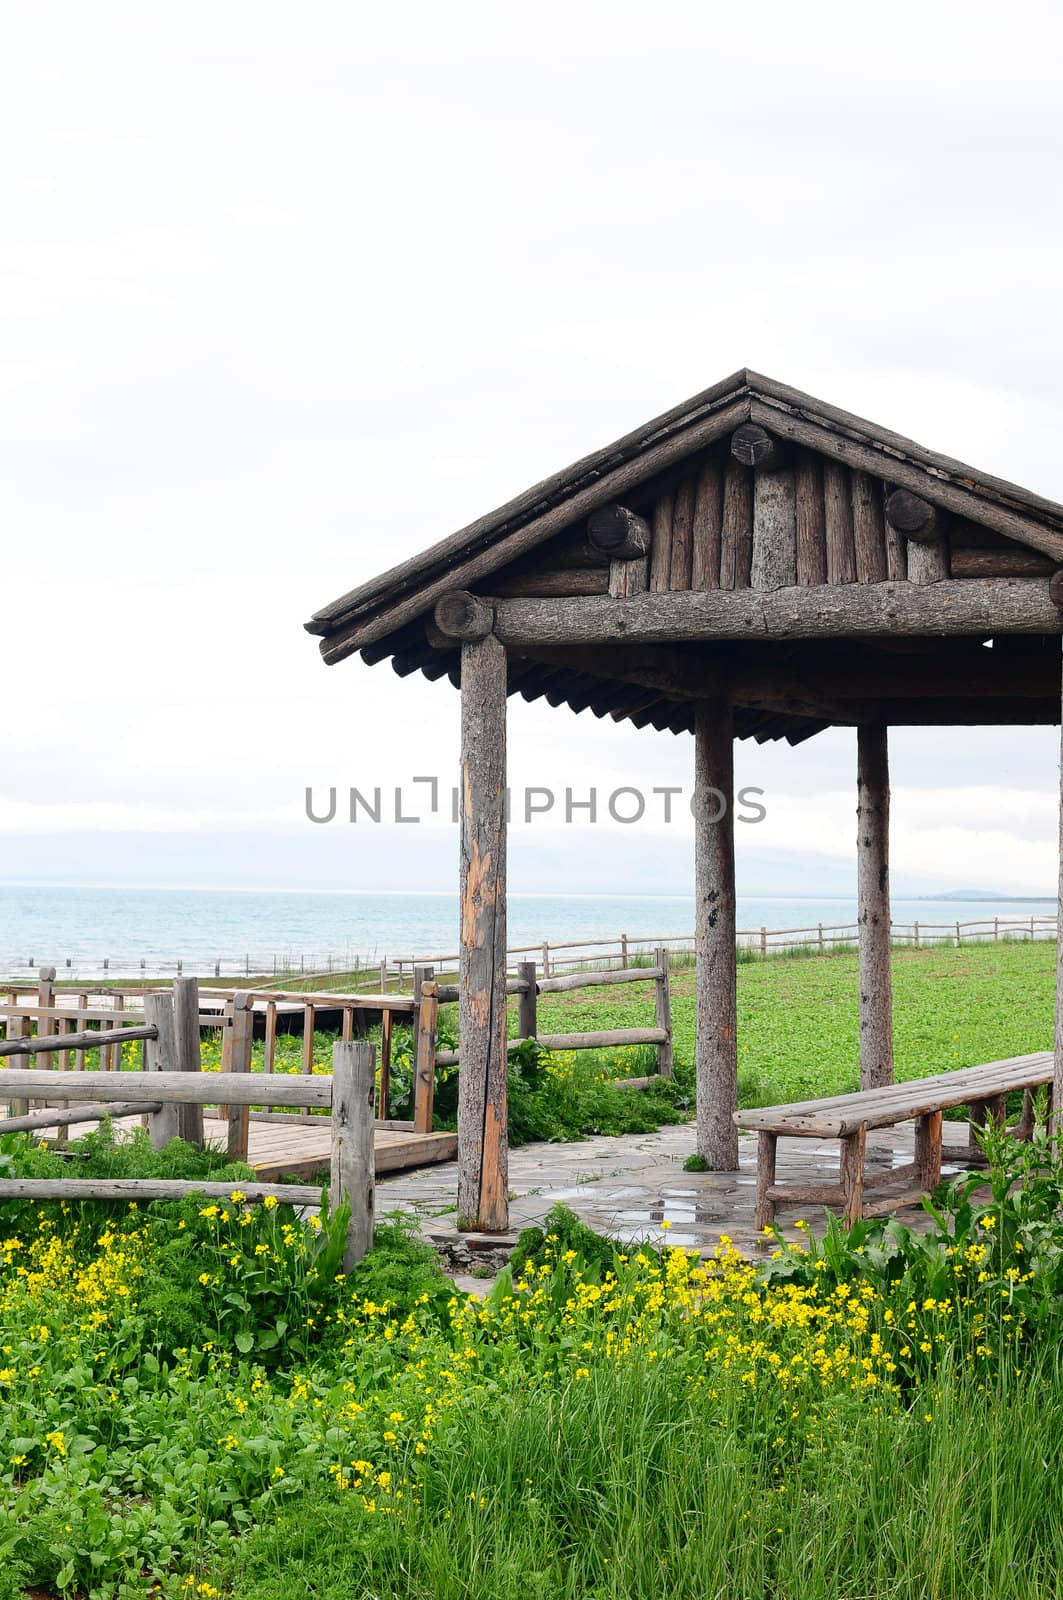 Landscape of wooden pavilion and fence in the grassland